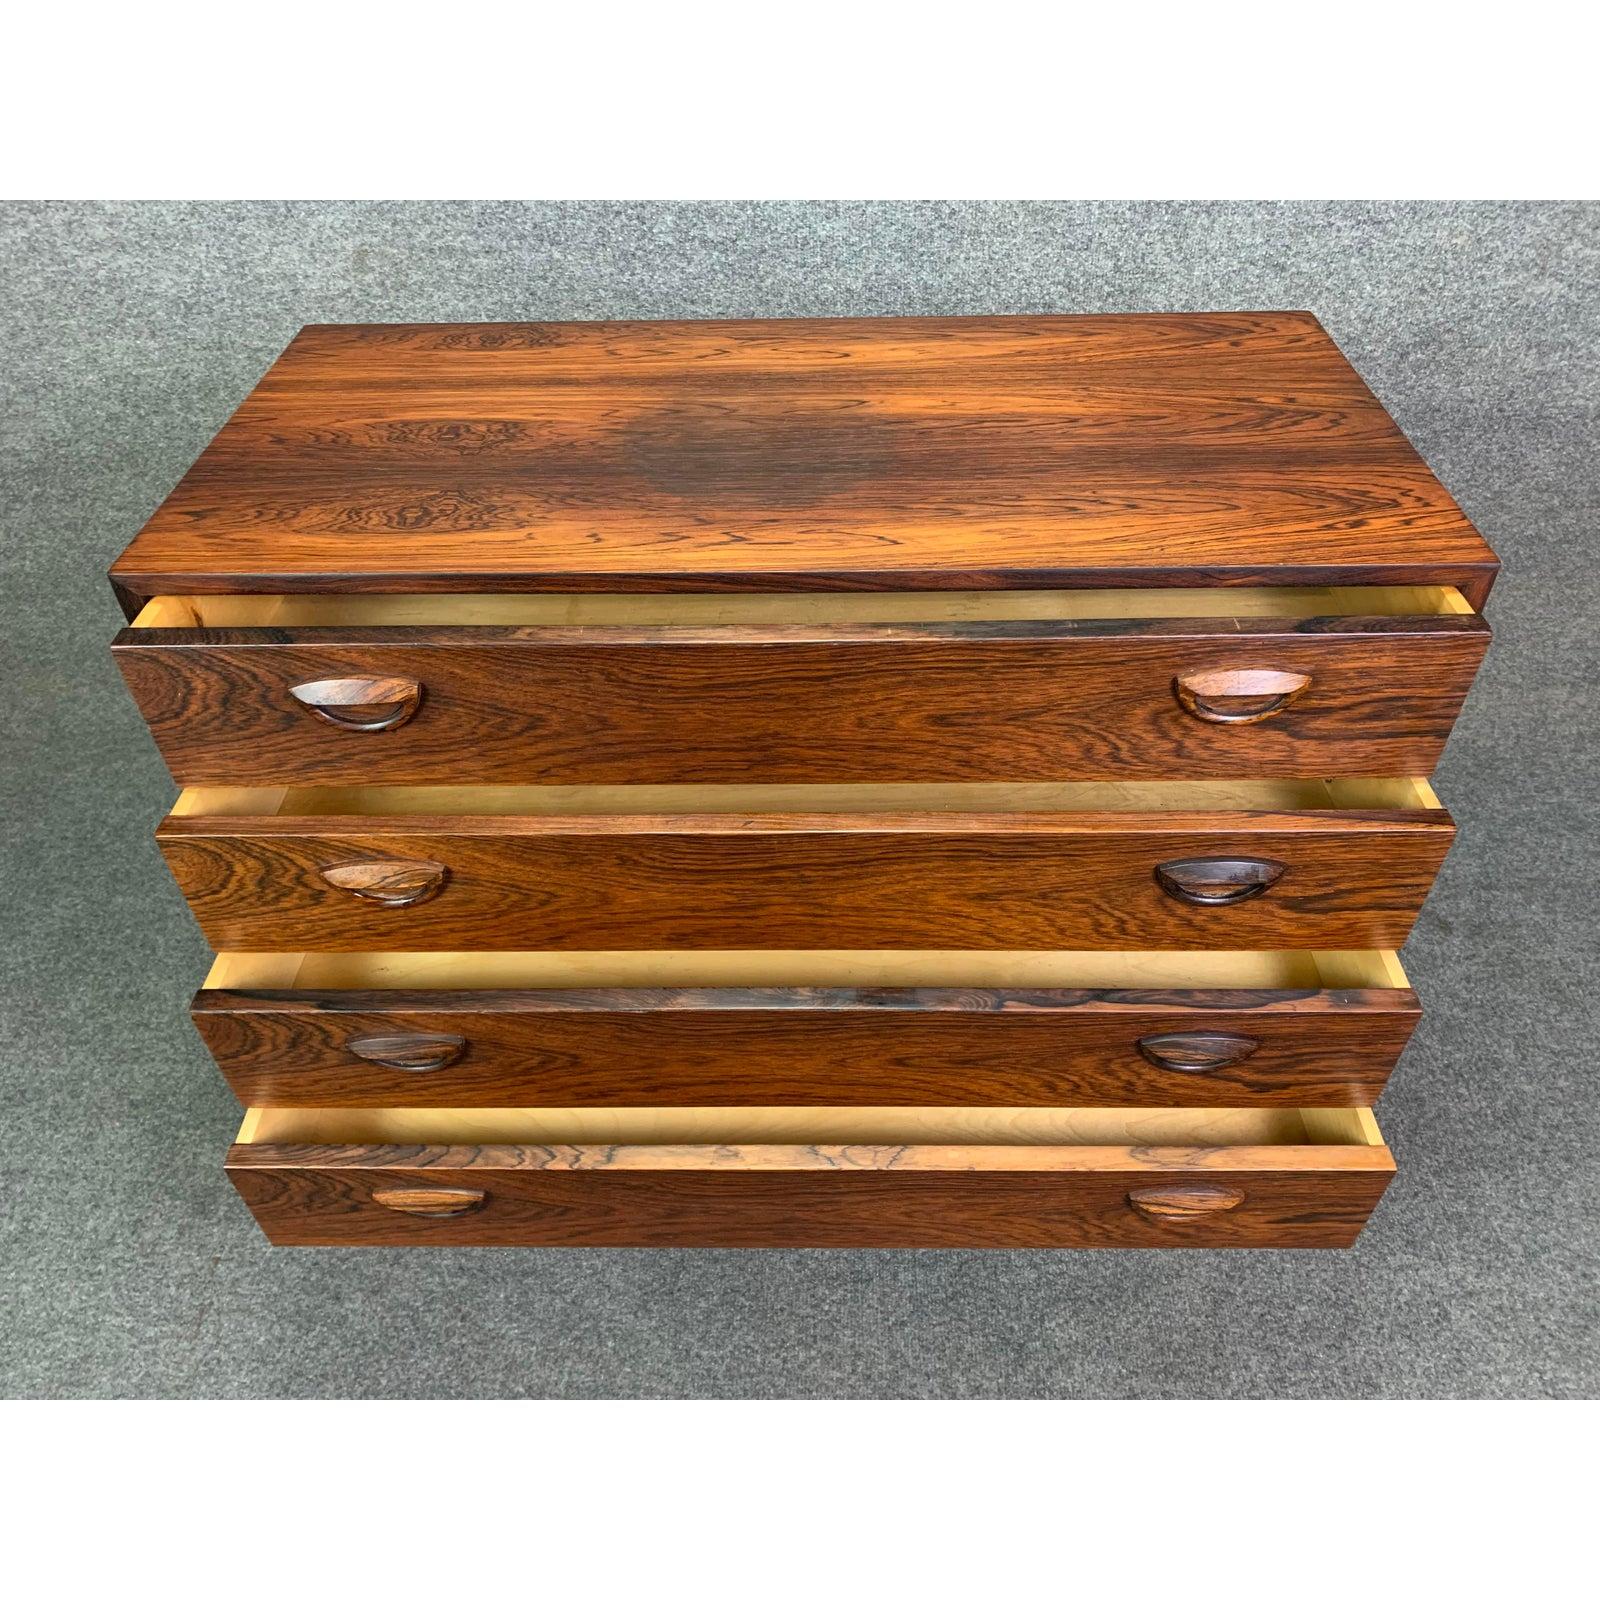 Here is a sought after Scandinavian Modern low boy dresser designed by Kai Kristiansen and manufactured by Feldballes Mobelfabrik in Denmark in the 1960s.
This exquisite chest of drawers, recently refinished, features a vibrant rosewood grain, a